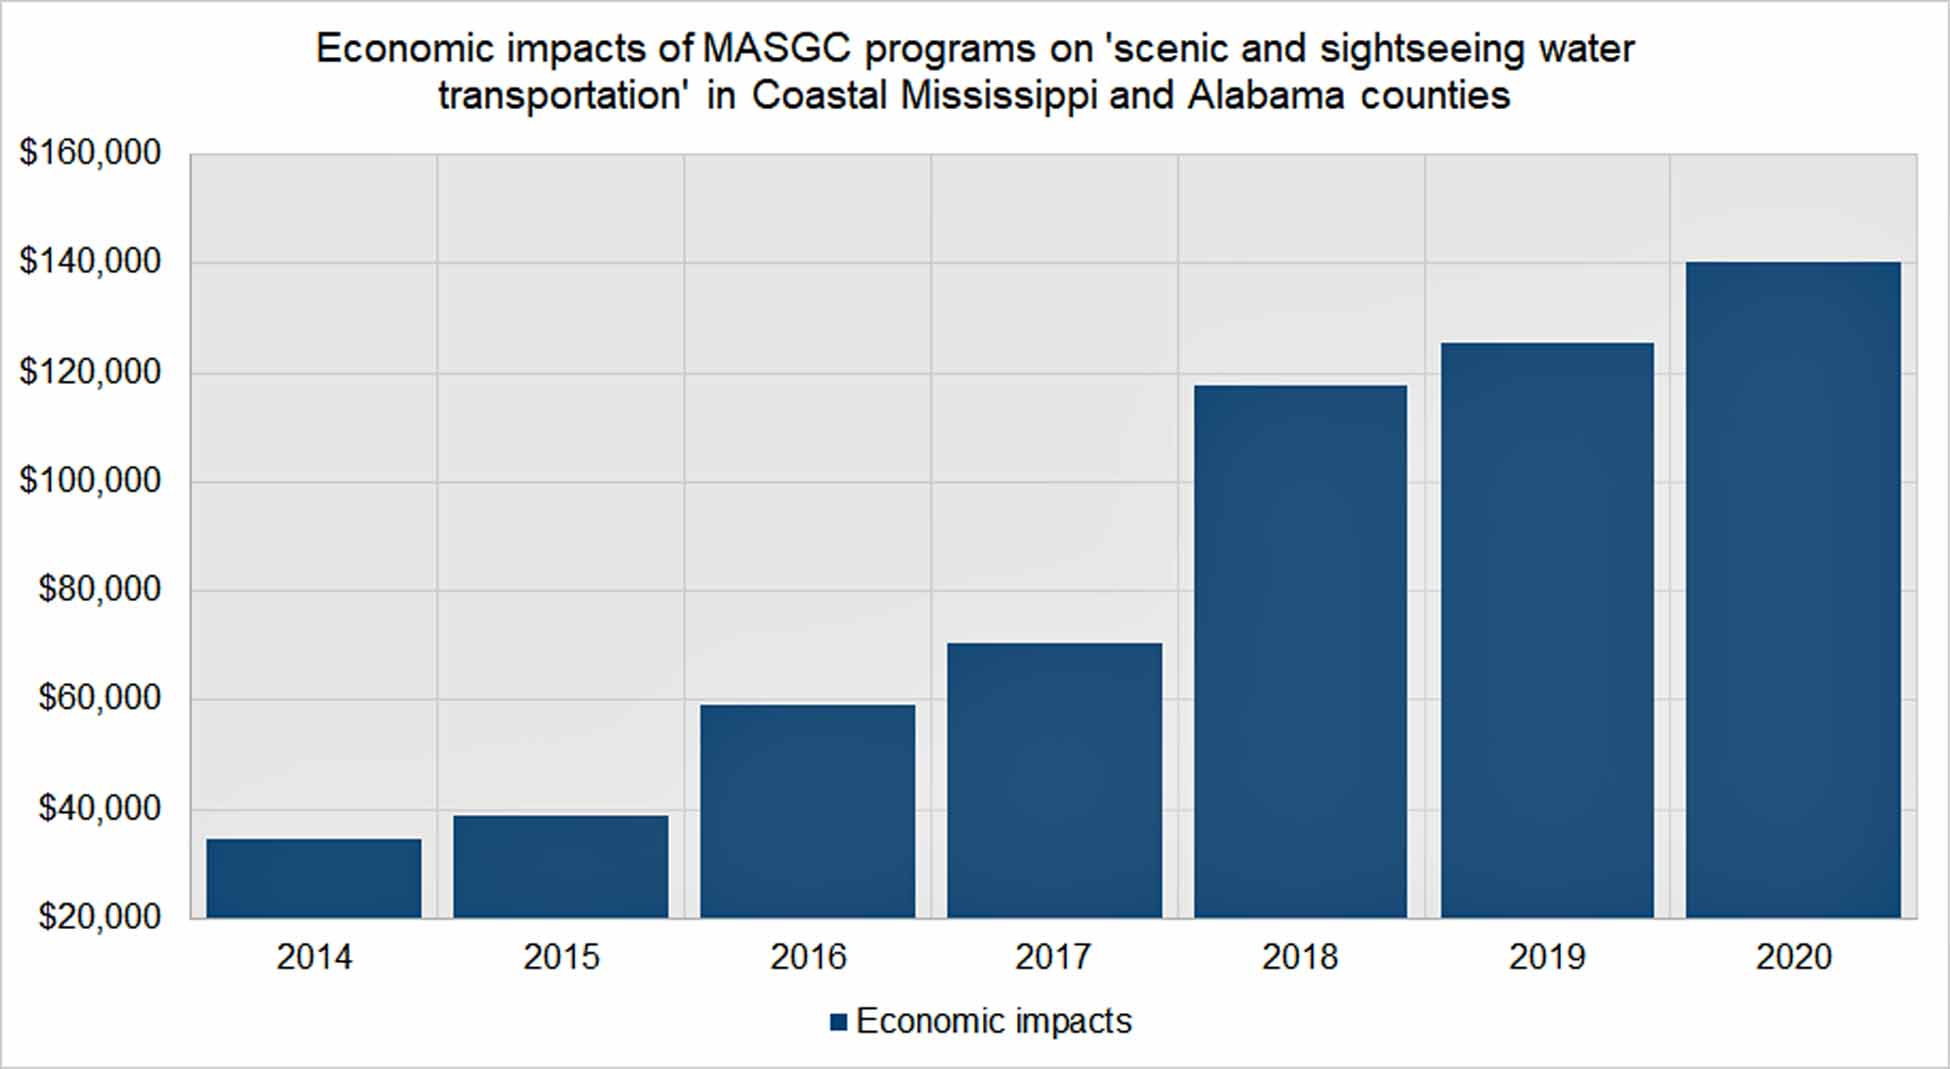 economic_impacts_of_masgc_programs_on_charter_boats_in_coastal_ms_and_al.jpg